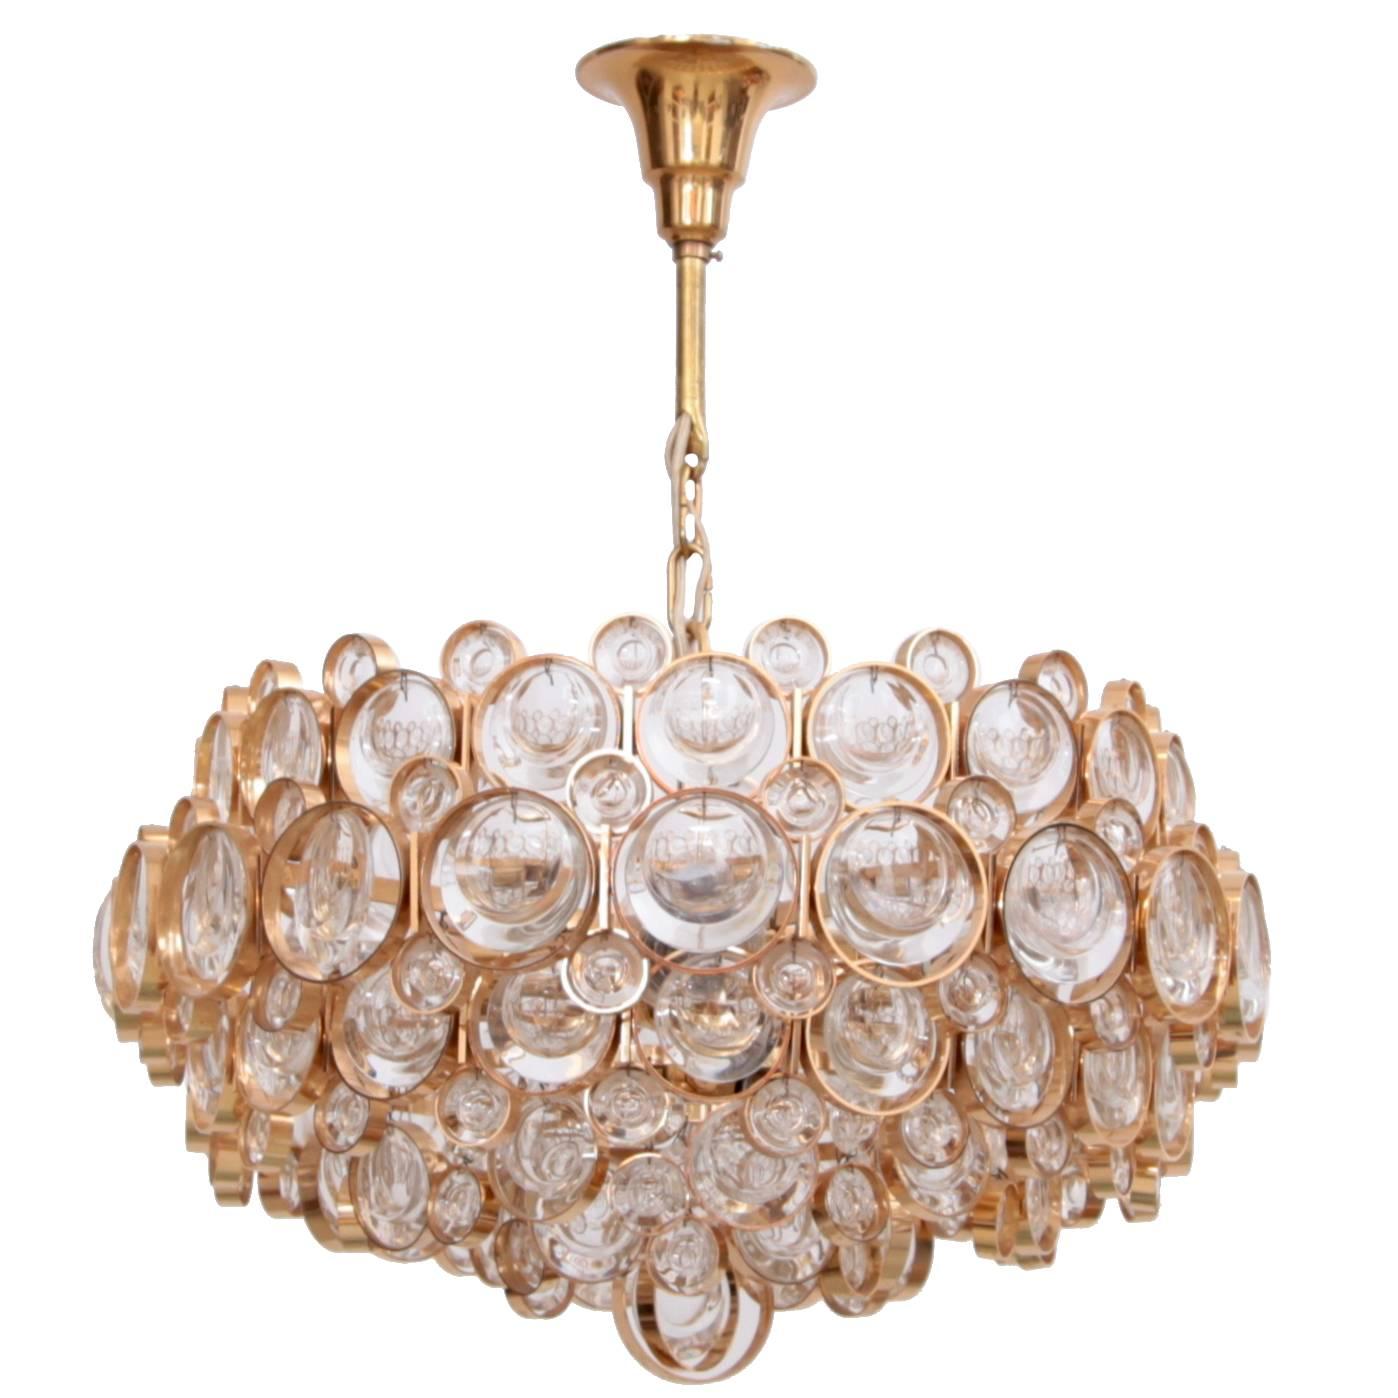 Outstanding Gilded Brass and Crystal Glass Chandelier by Palwa